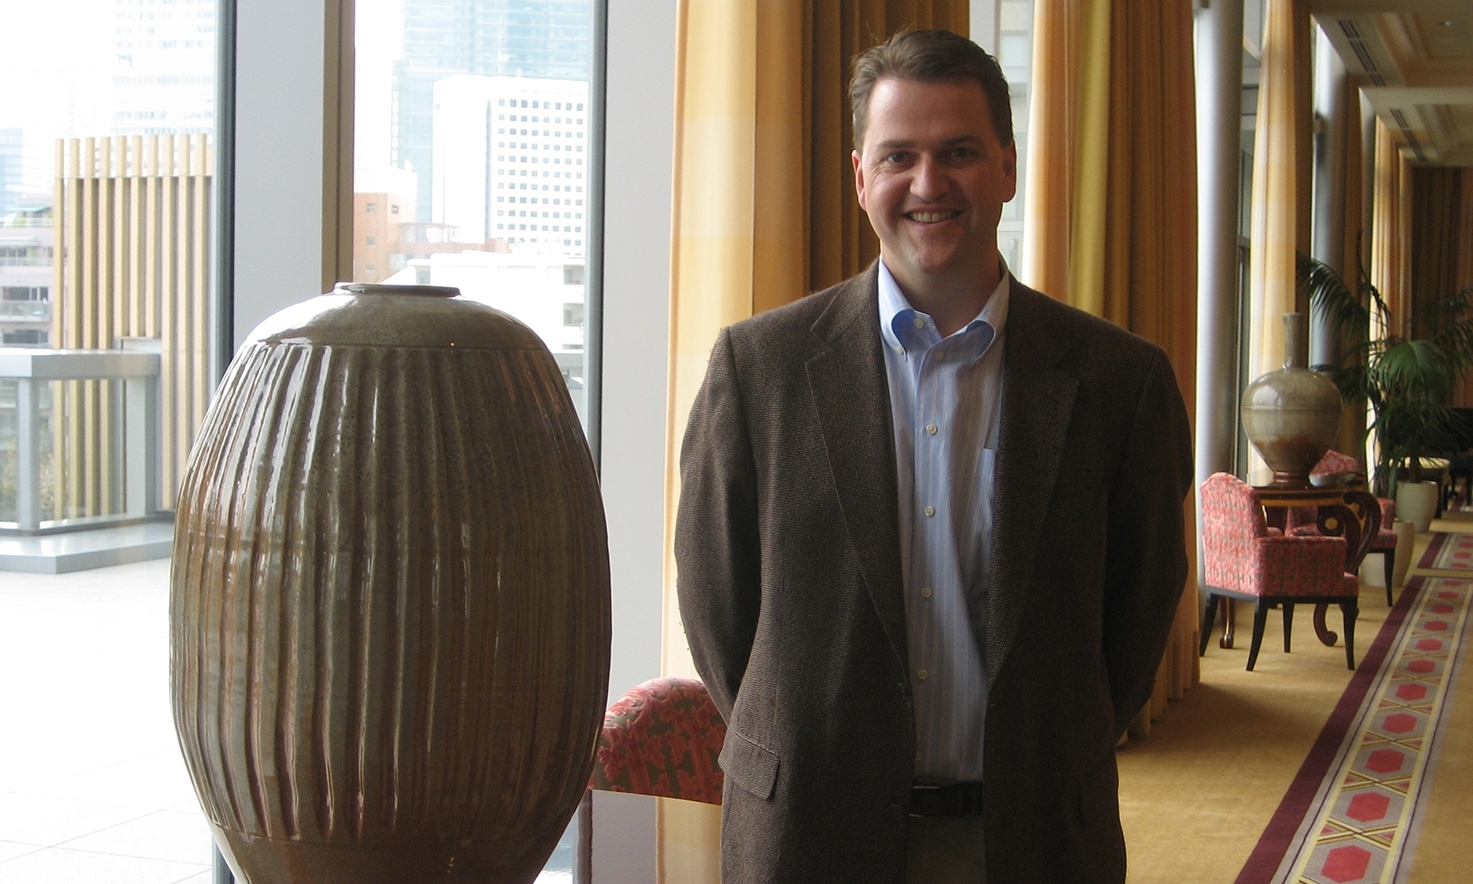   Ben Owen III with his Carved Vase at the Ritz-Carlton Hotel in Tokyo, Japan.  